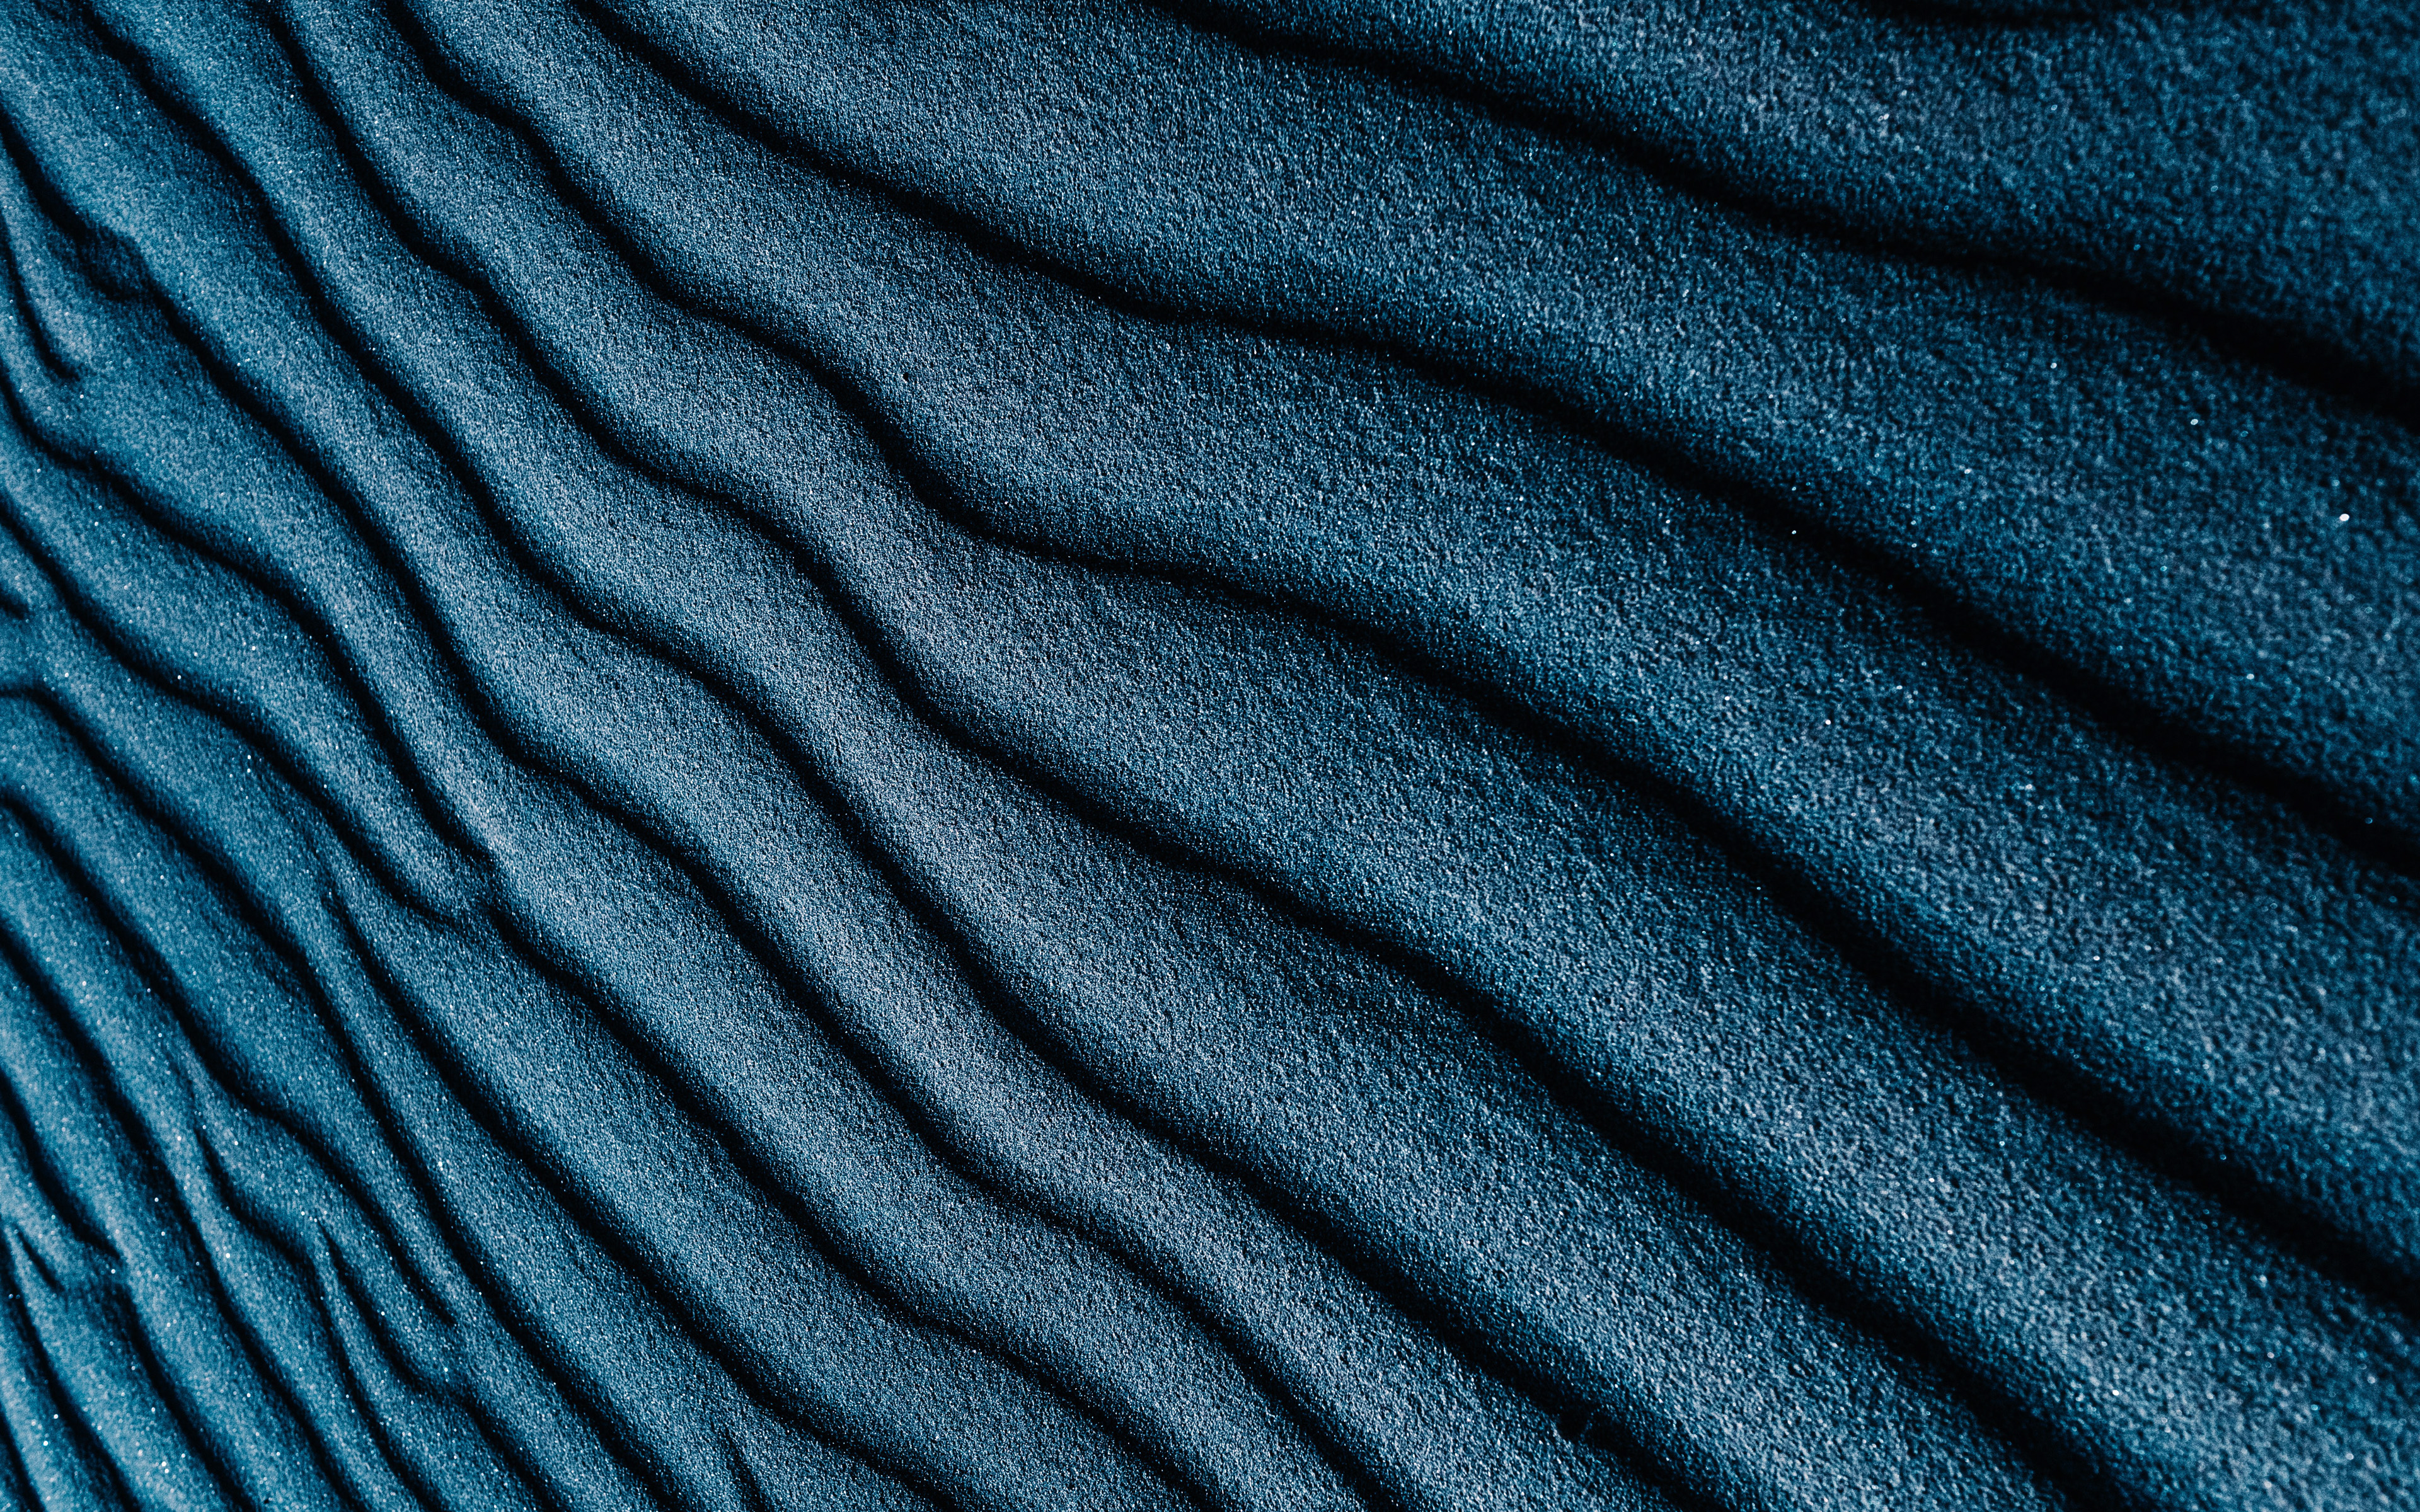 Download wallpaper blue sand, 4k, sand wavy textures, macro, sand wavy background, 3D textures, sand background, sand textures, background with sand for desktop with resolution 3840x2400. High Quality HD picture wallpaper